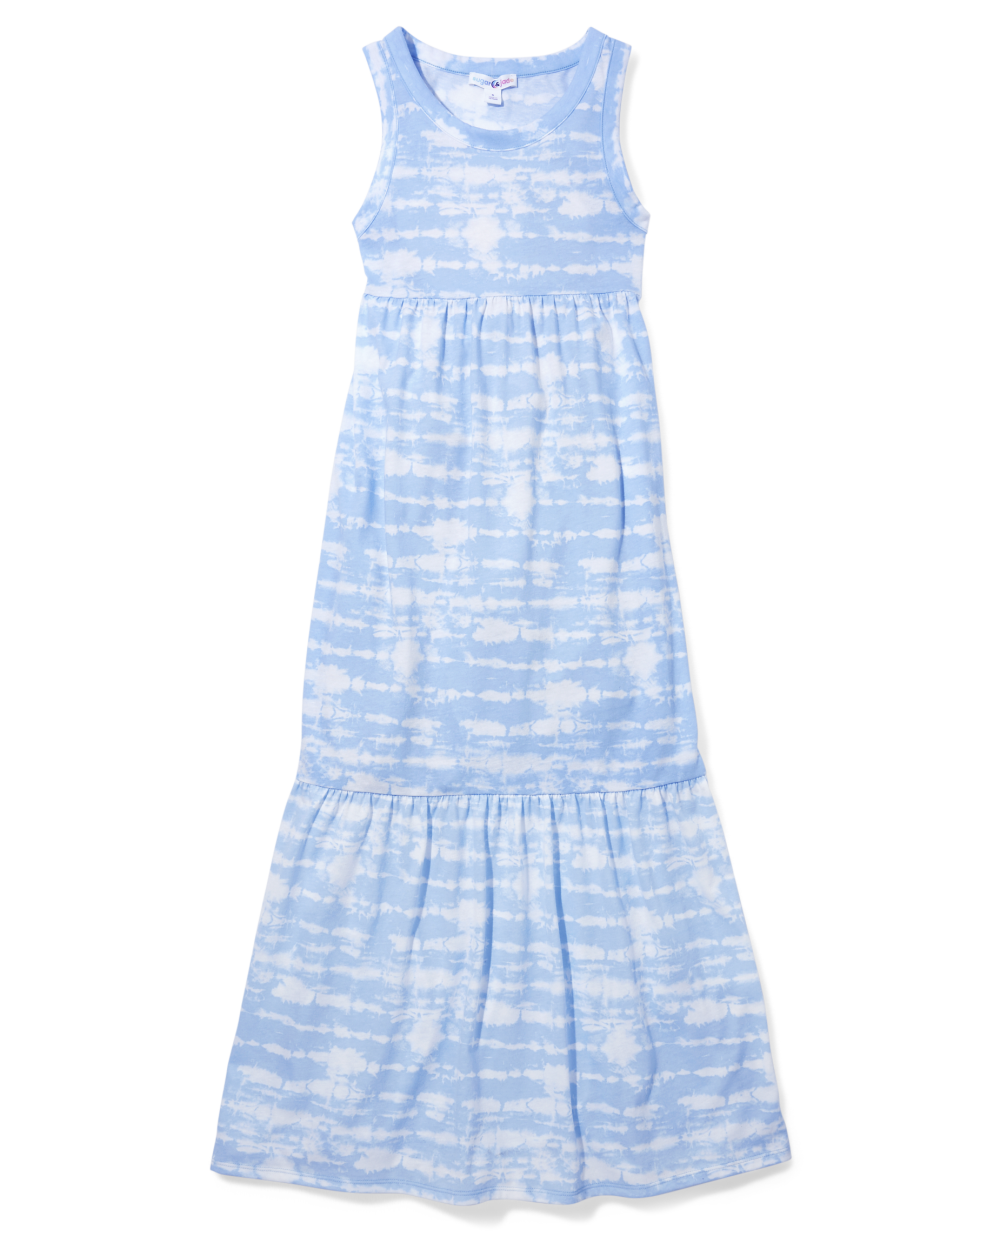 Girls Below the Knee Sleeveless Tank Round Neck Ruched Tie Dye Print Maxi Dress With Ruffles